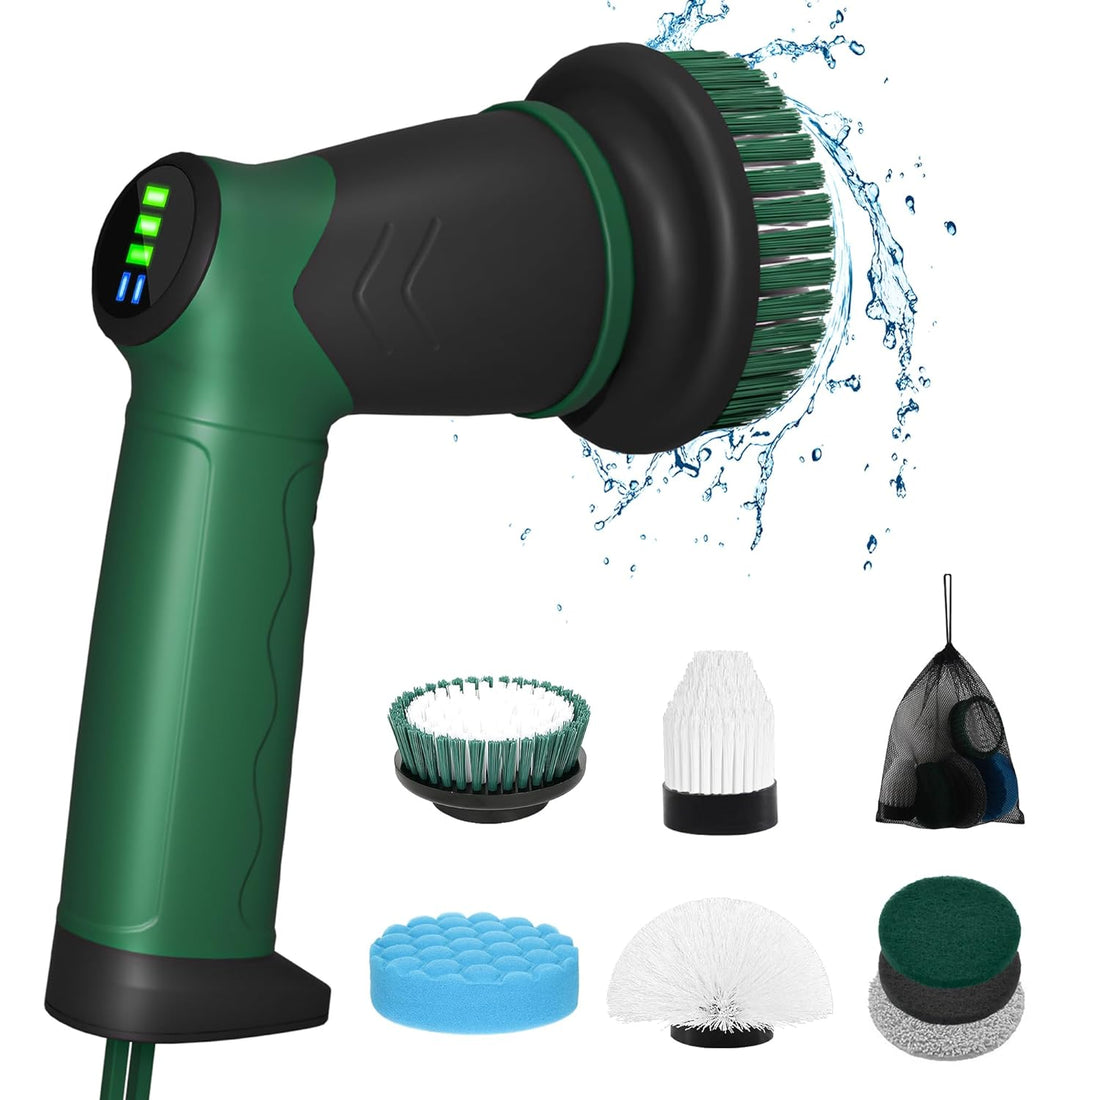 DAESUNG Electric Spin Scrubber, Shower Scrubber for Bathroom Electric Cleaning Brush with 7 Replaceable Electric Scrubber for Cleaning Wall, Stove, Tile, Bathtub, Toilet, Window